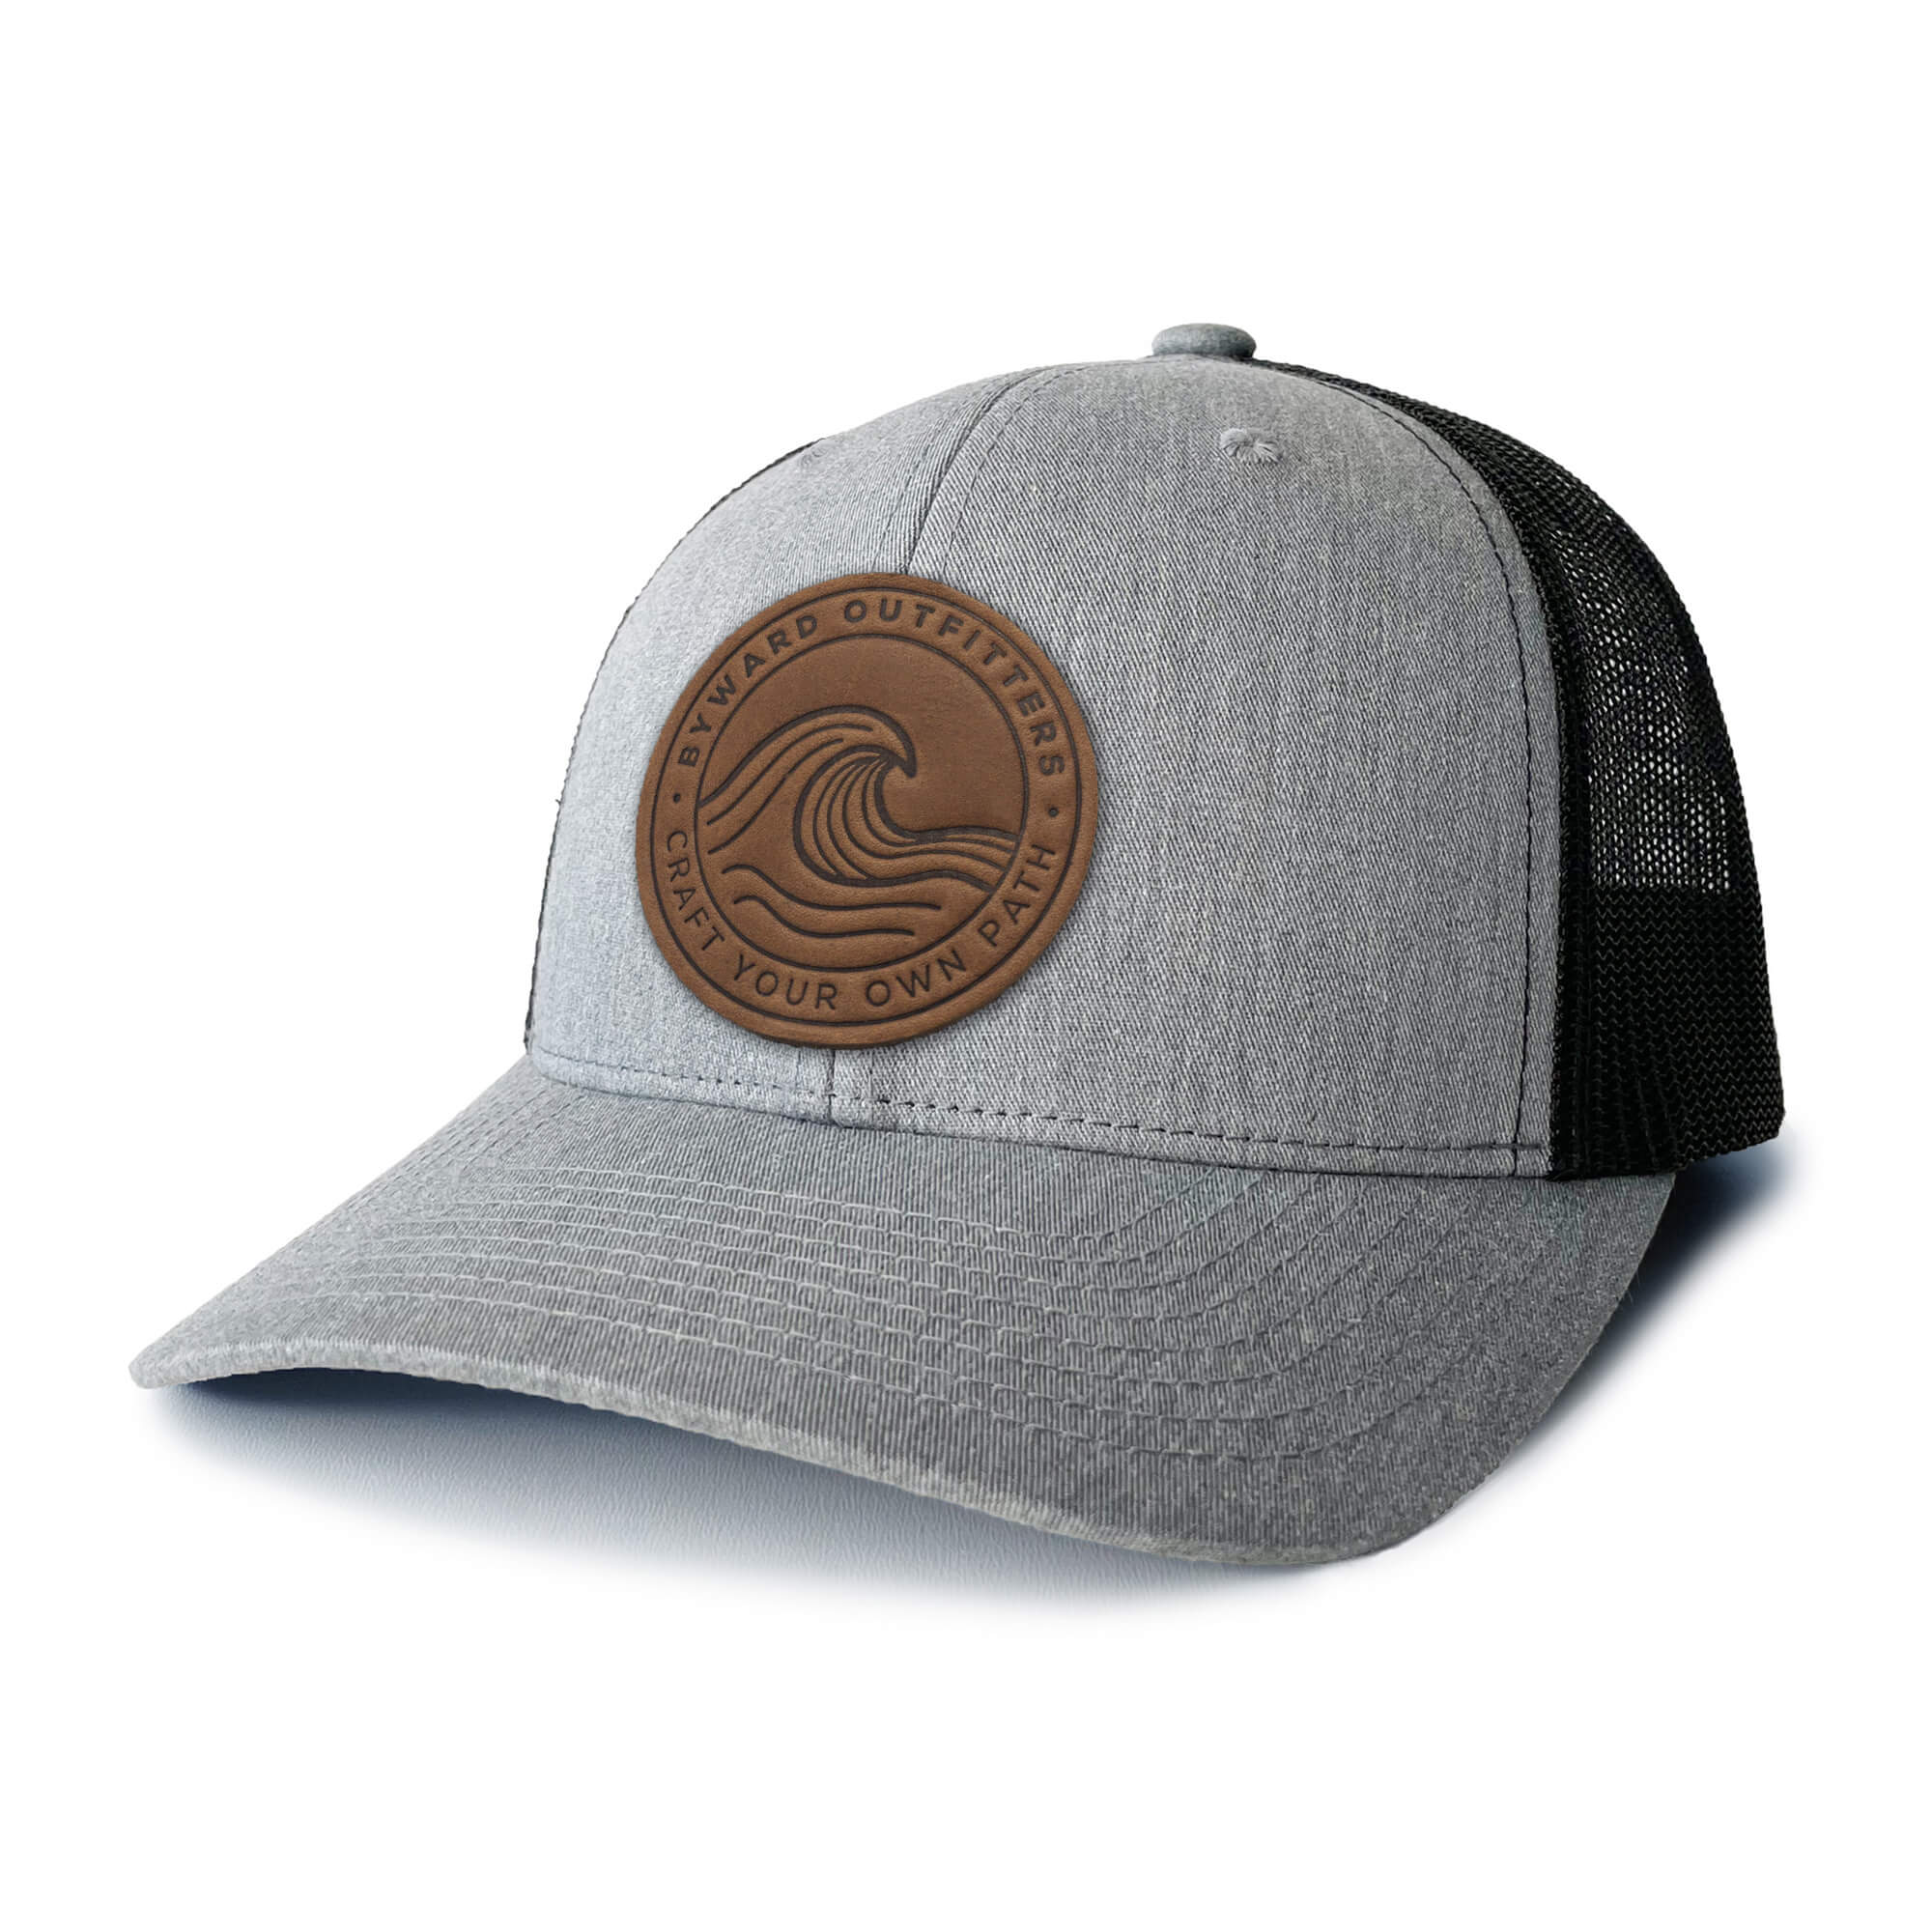 Heather Grey and white trucker hat with full-grain leather patch of a Rolling Wave | BLACK-005-003, CHARC-005-003, NAVY-005-003, HGREY-005-003, MOSS-005-003, BROWN-005-003